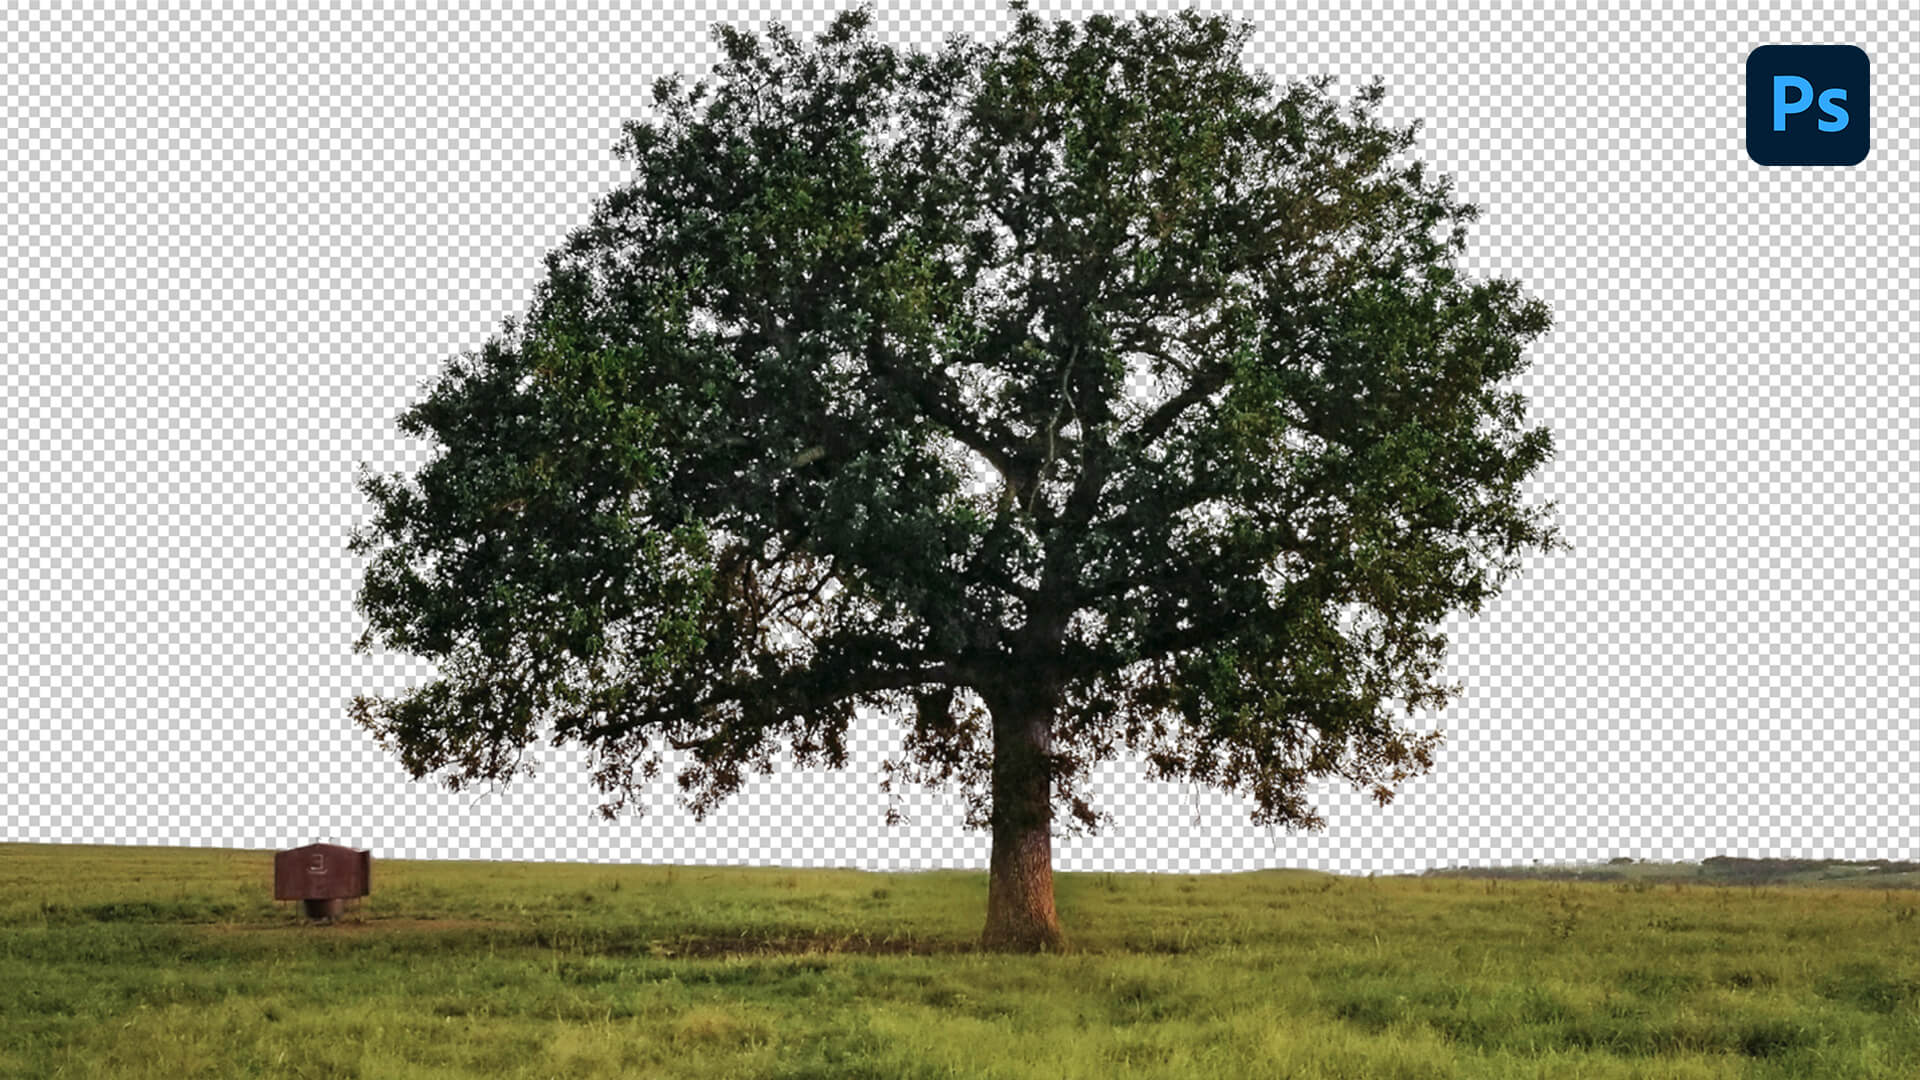 How to Cut Out Trees in Photoshop